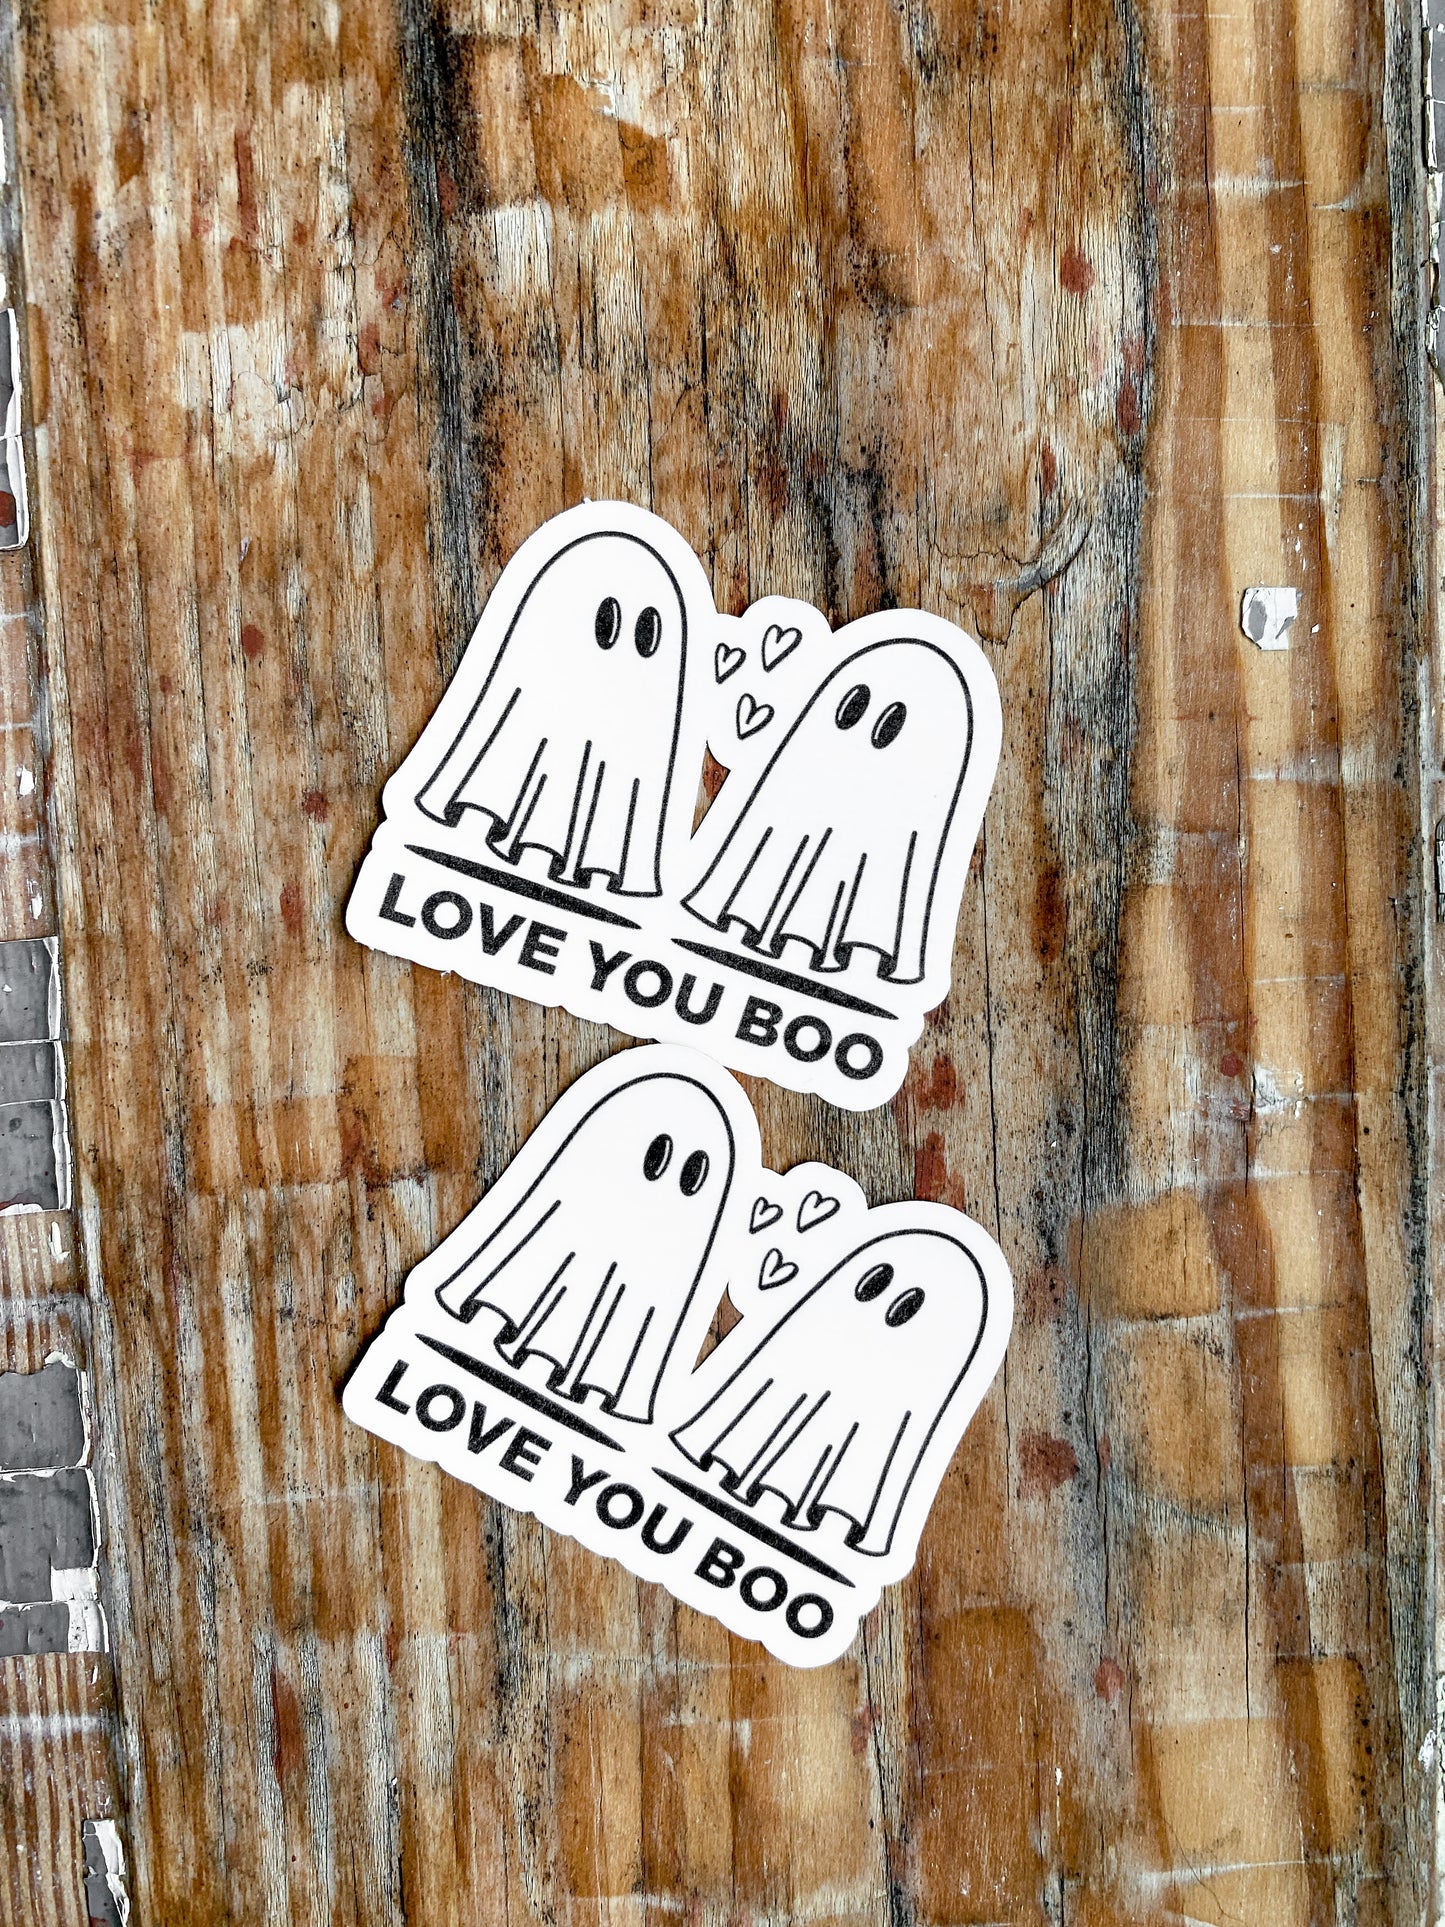 2 Love You Boo stickers. 2 ghosts saying "Love you boo"